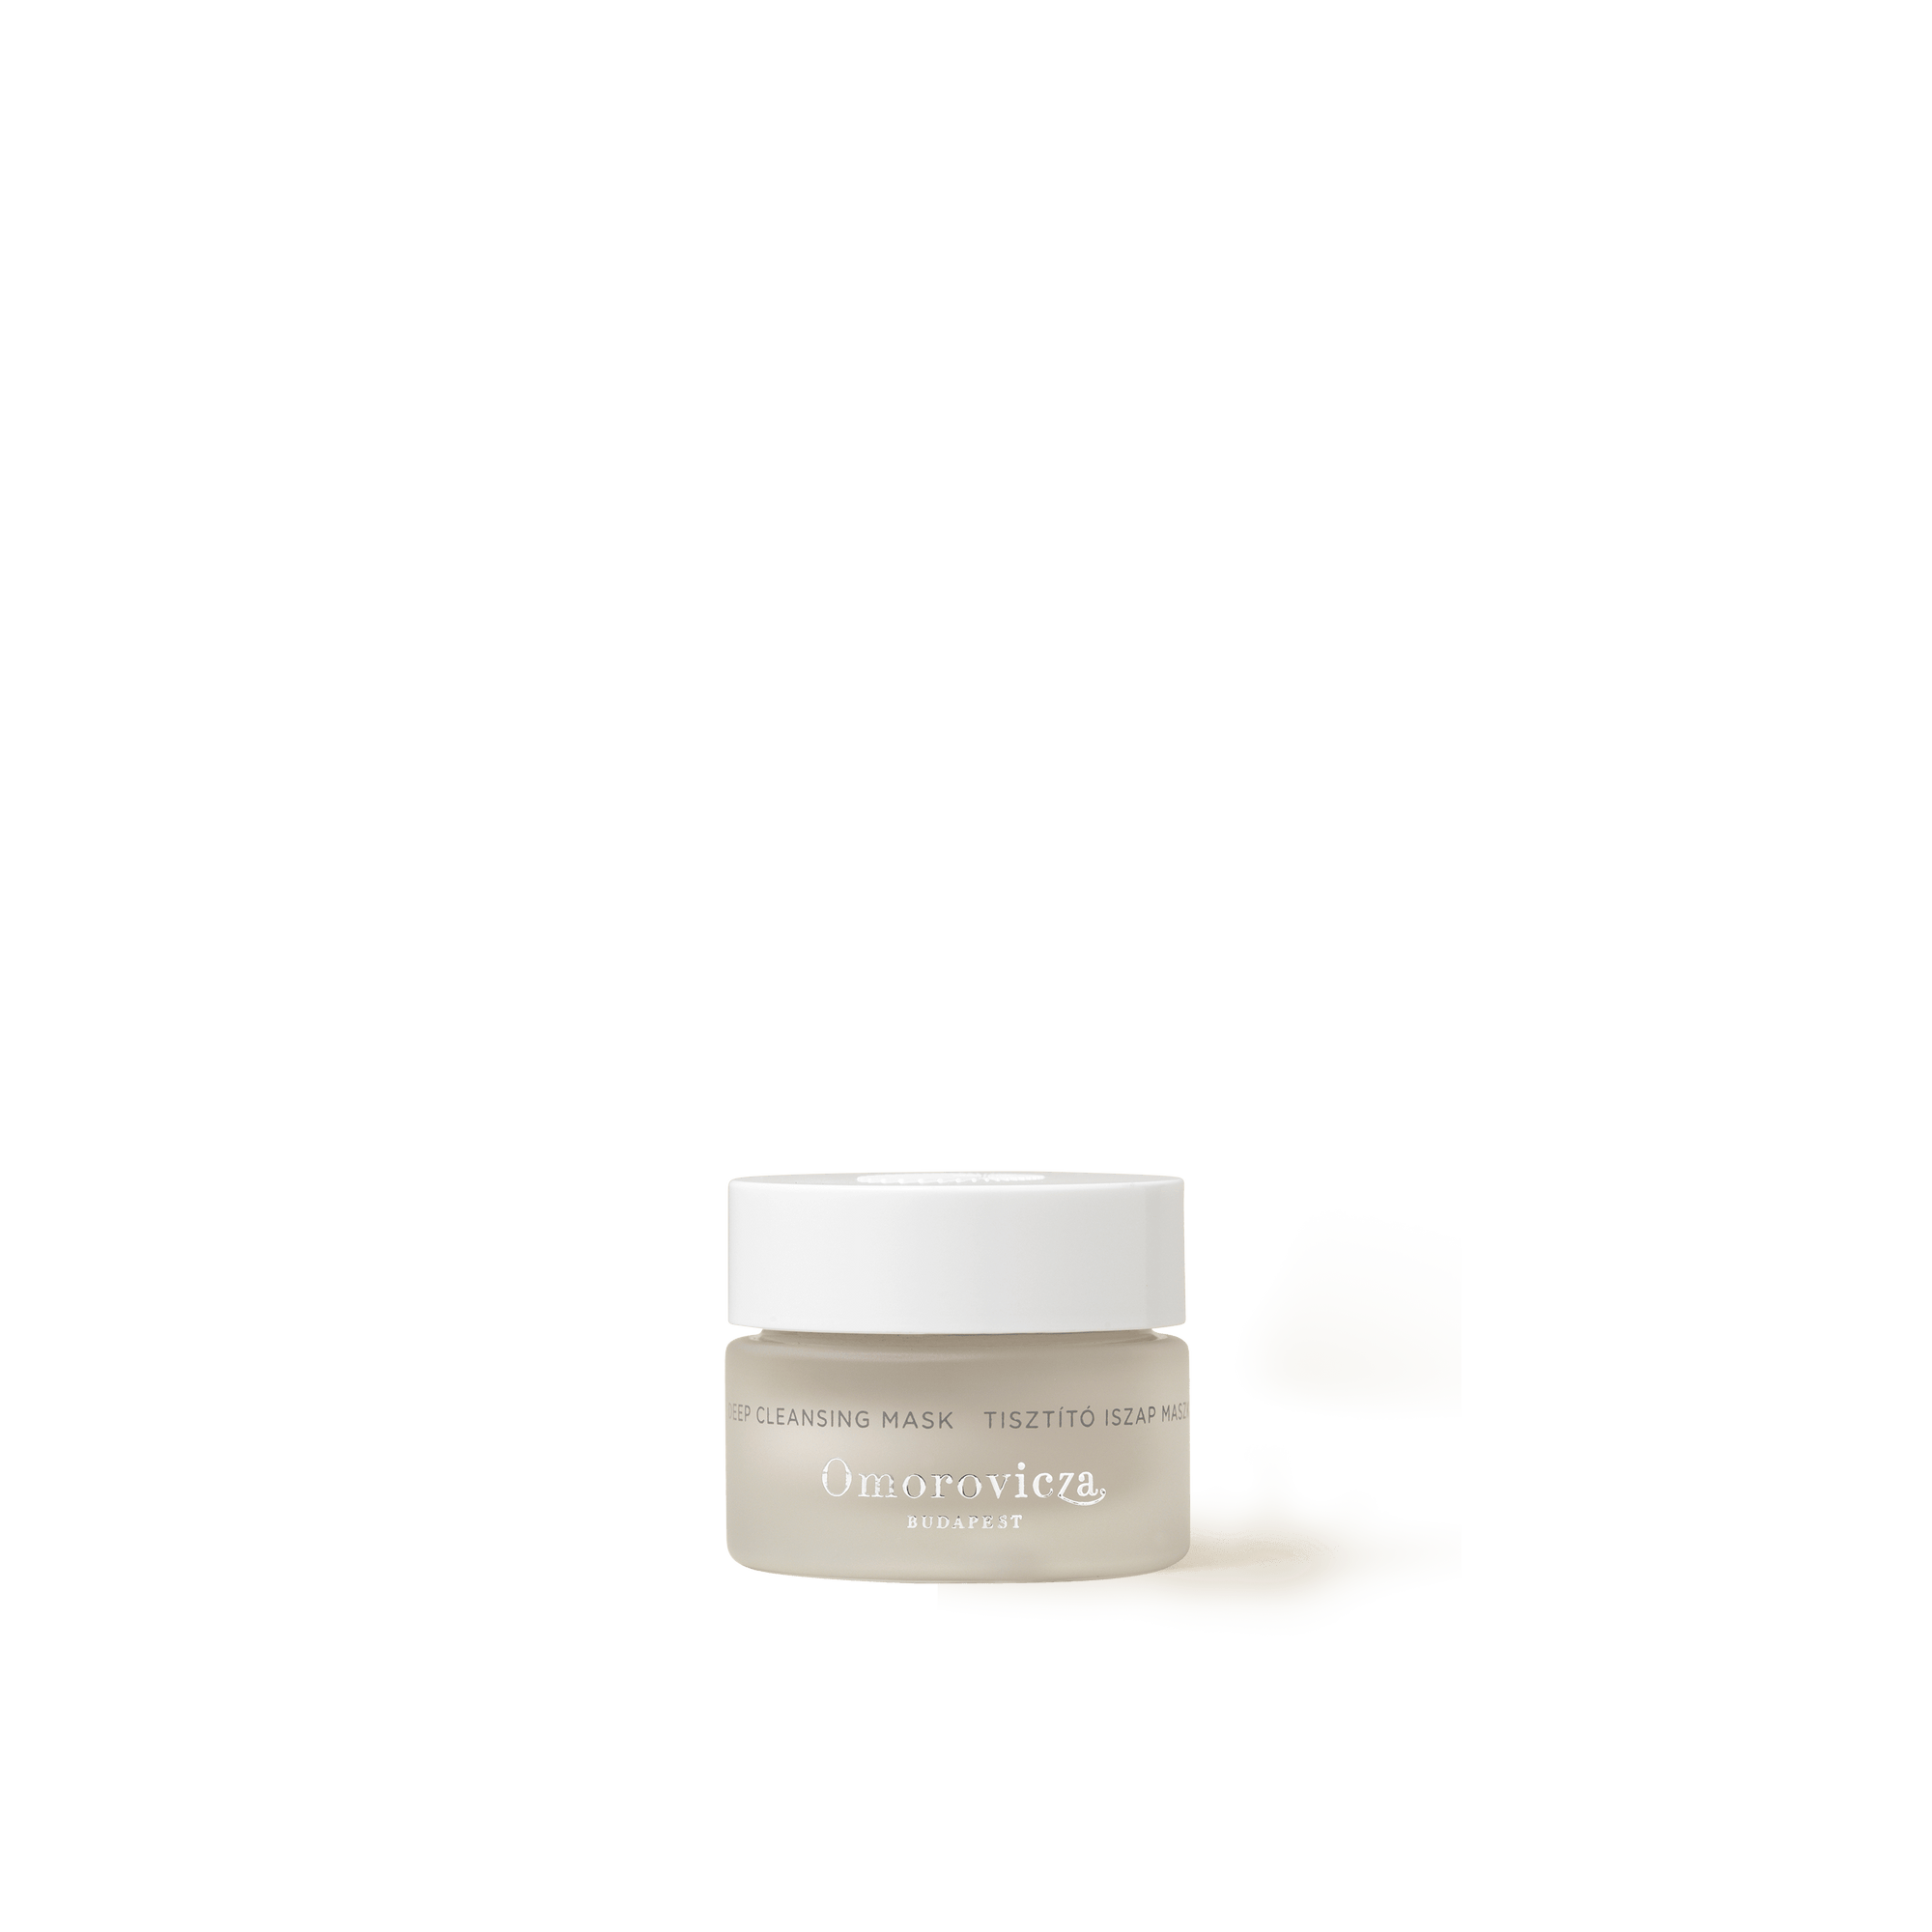 Deep Cleansing Mask travel size version 15ml